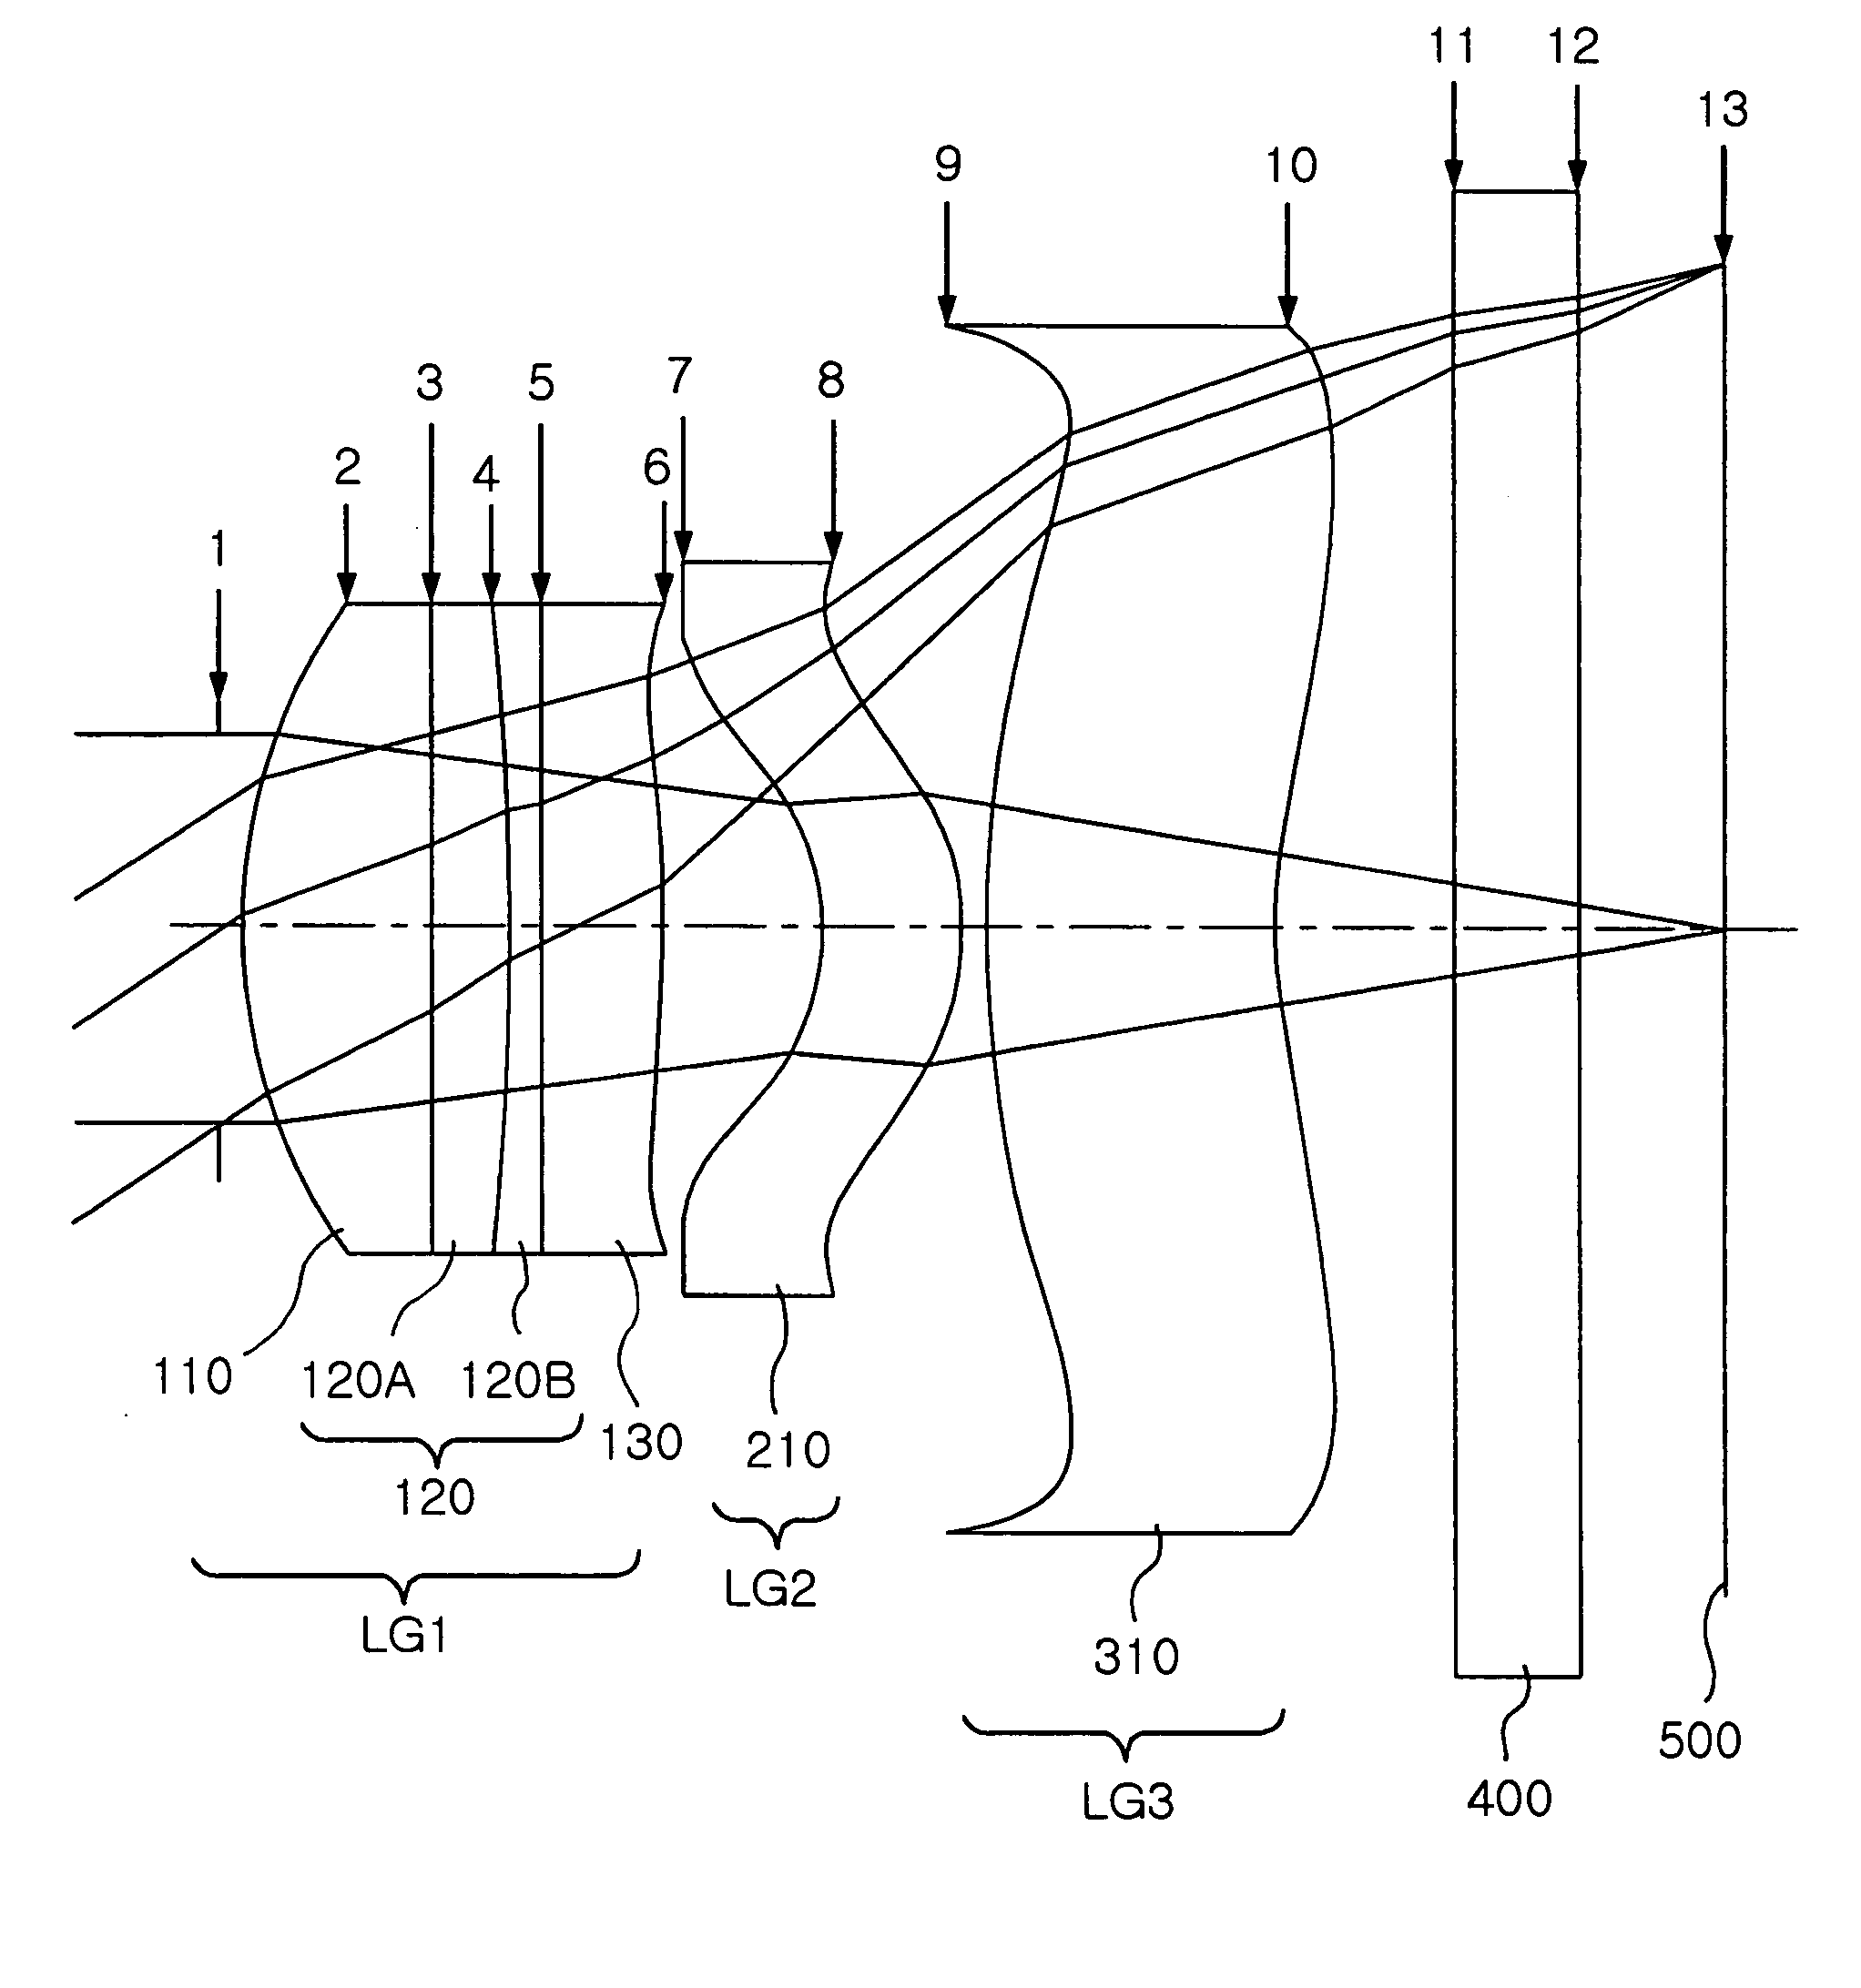 Auto-focusing optical system for camera module